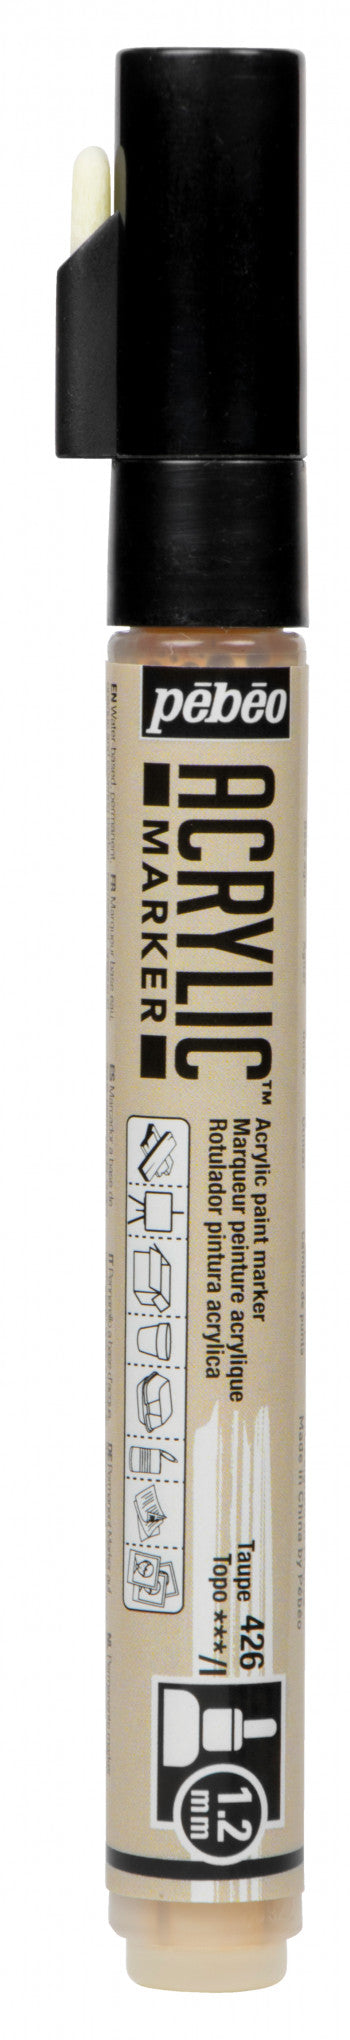 Acrylic Marker 1.2mm Pebeo Taupe